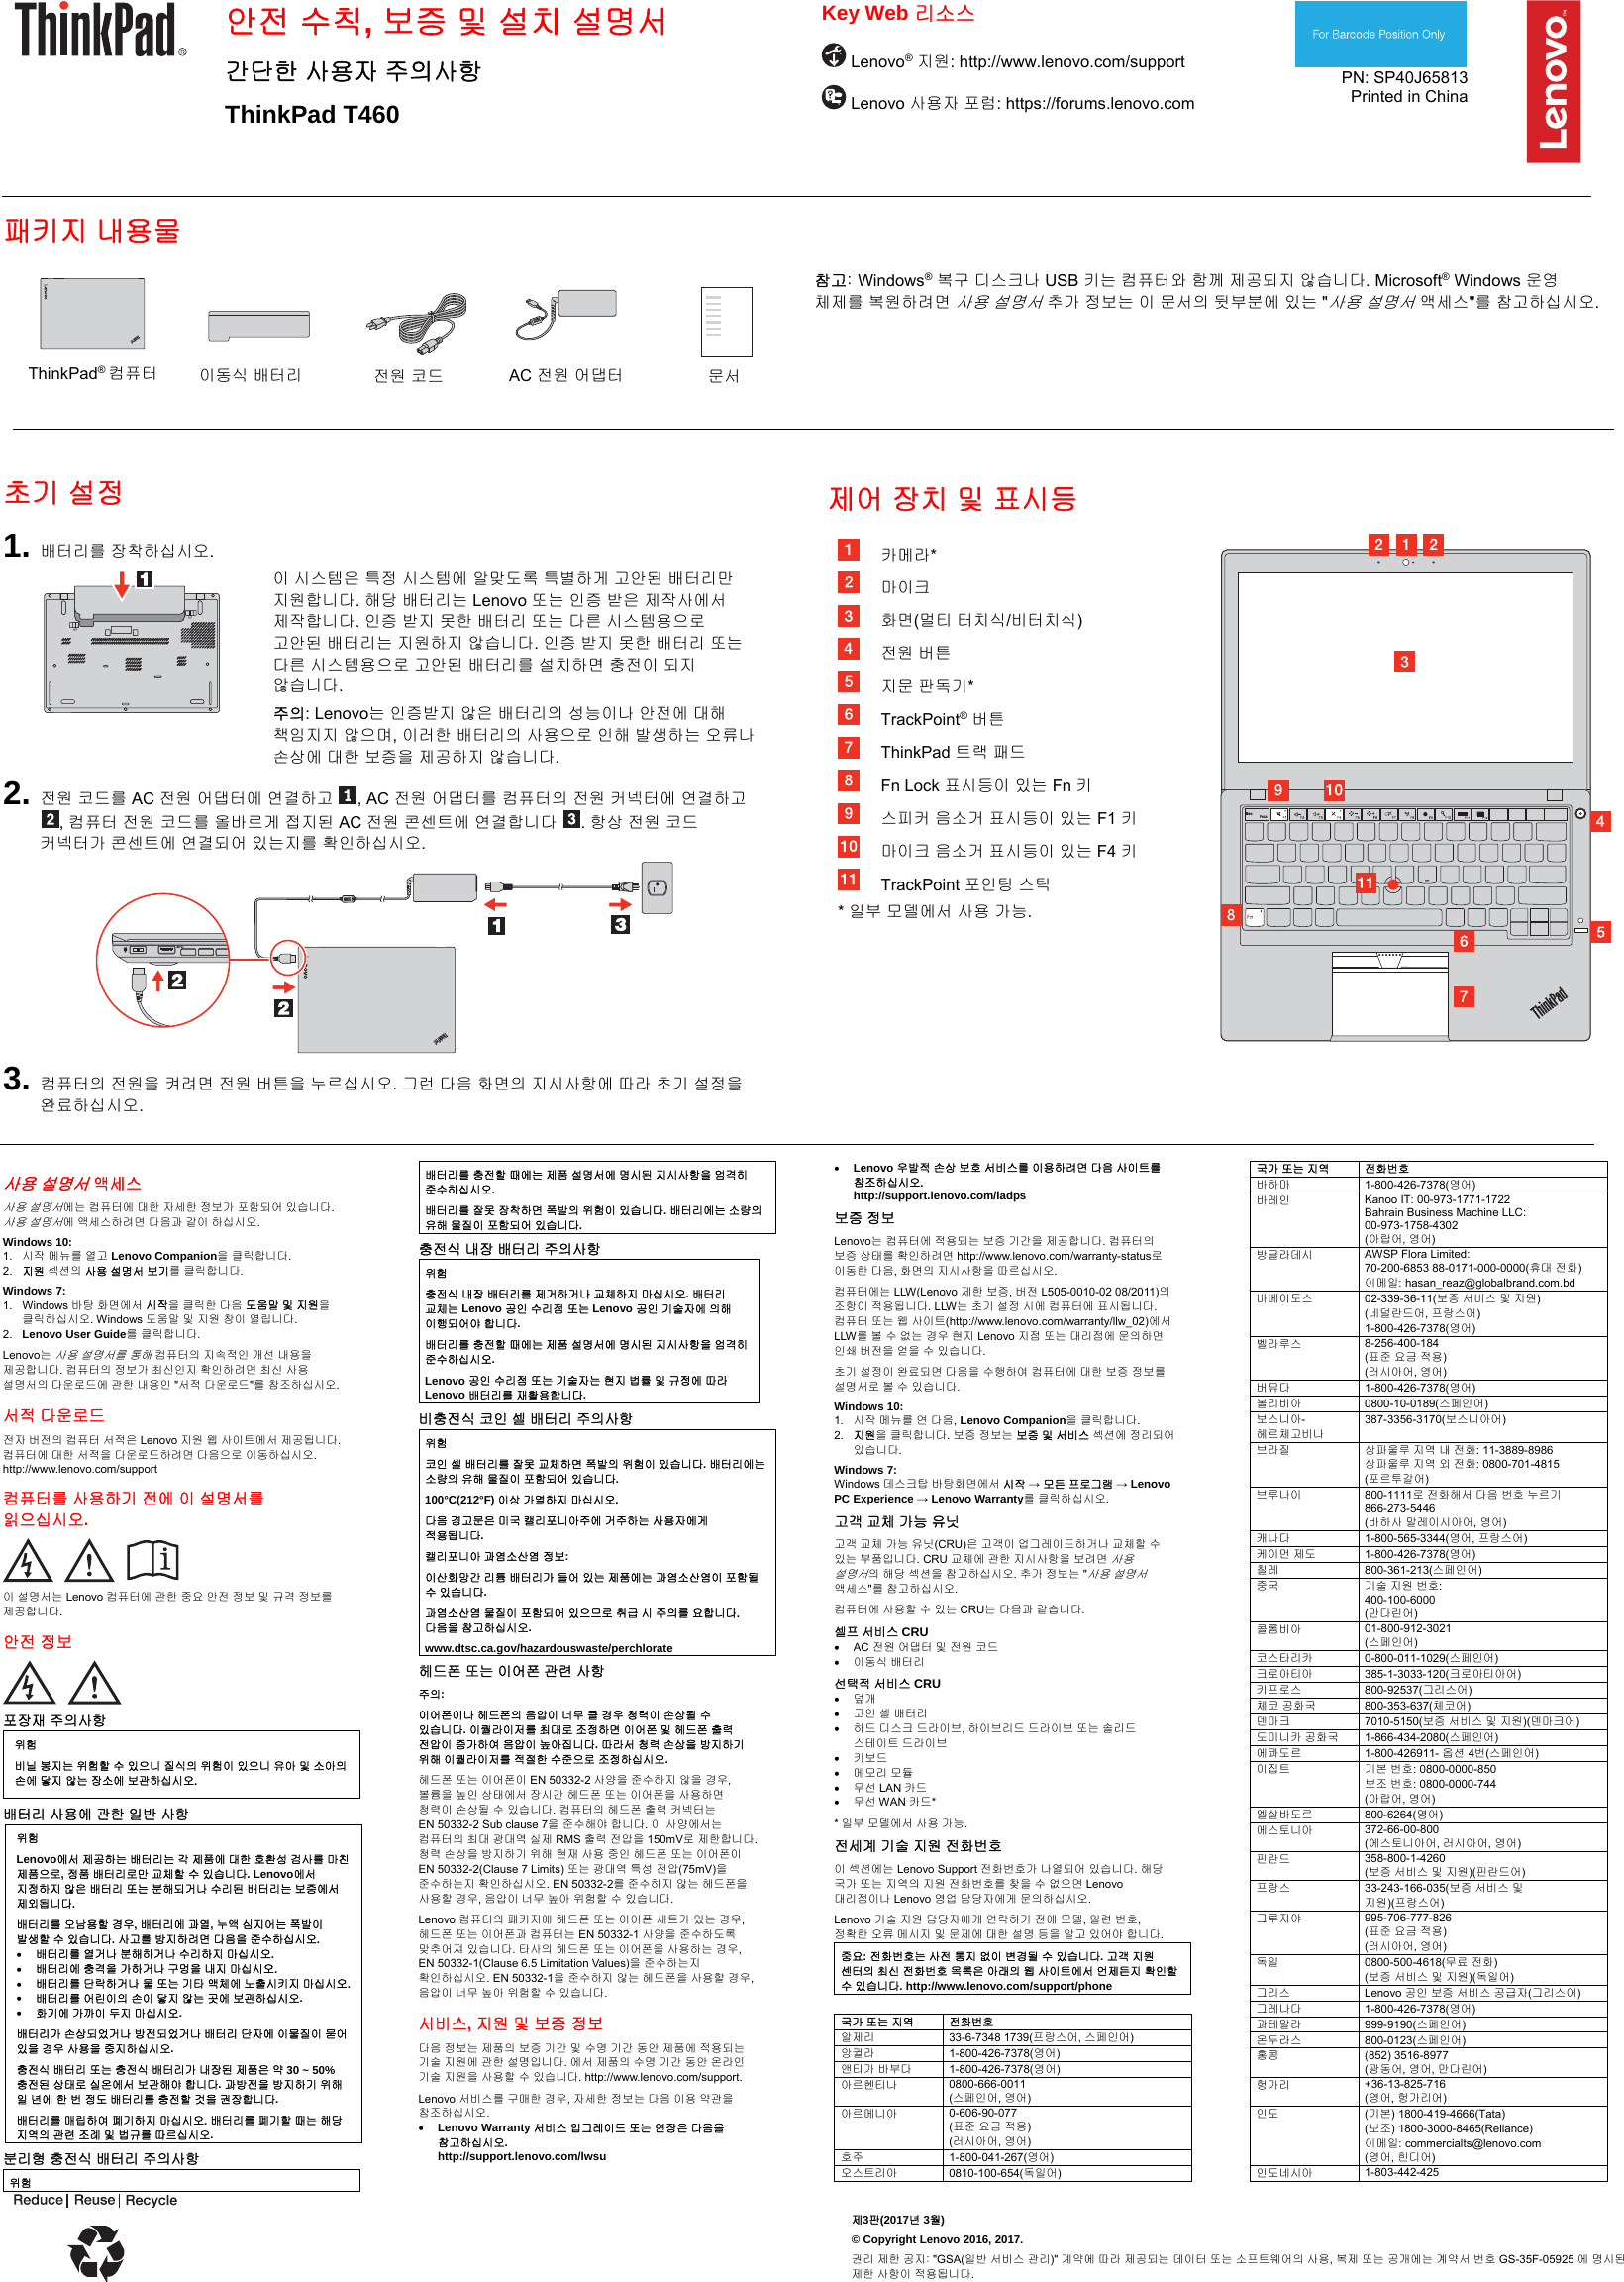 Page 1 of 2 - Lenovo T460 Swsg Sp40J65813 Ko - T460_swsg_ko_sp40j65813x User Manual (Korean) Safety, Warranty And Setup Guide Think Pad Laptop (Think Pad) Type 20FM